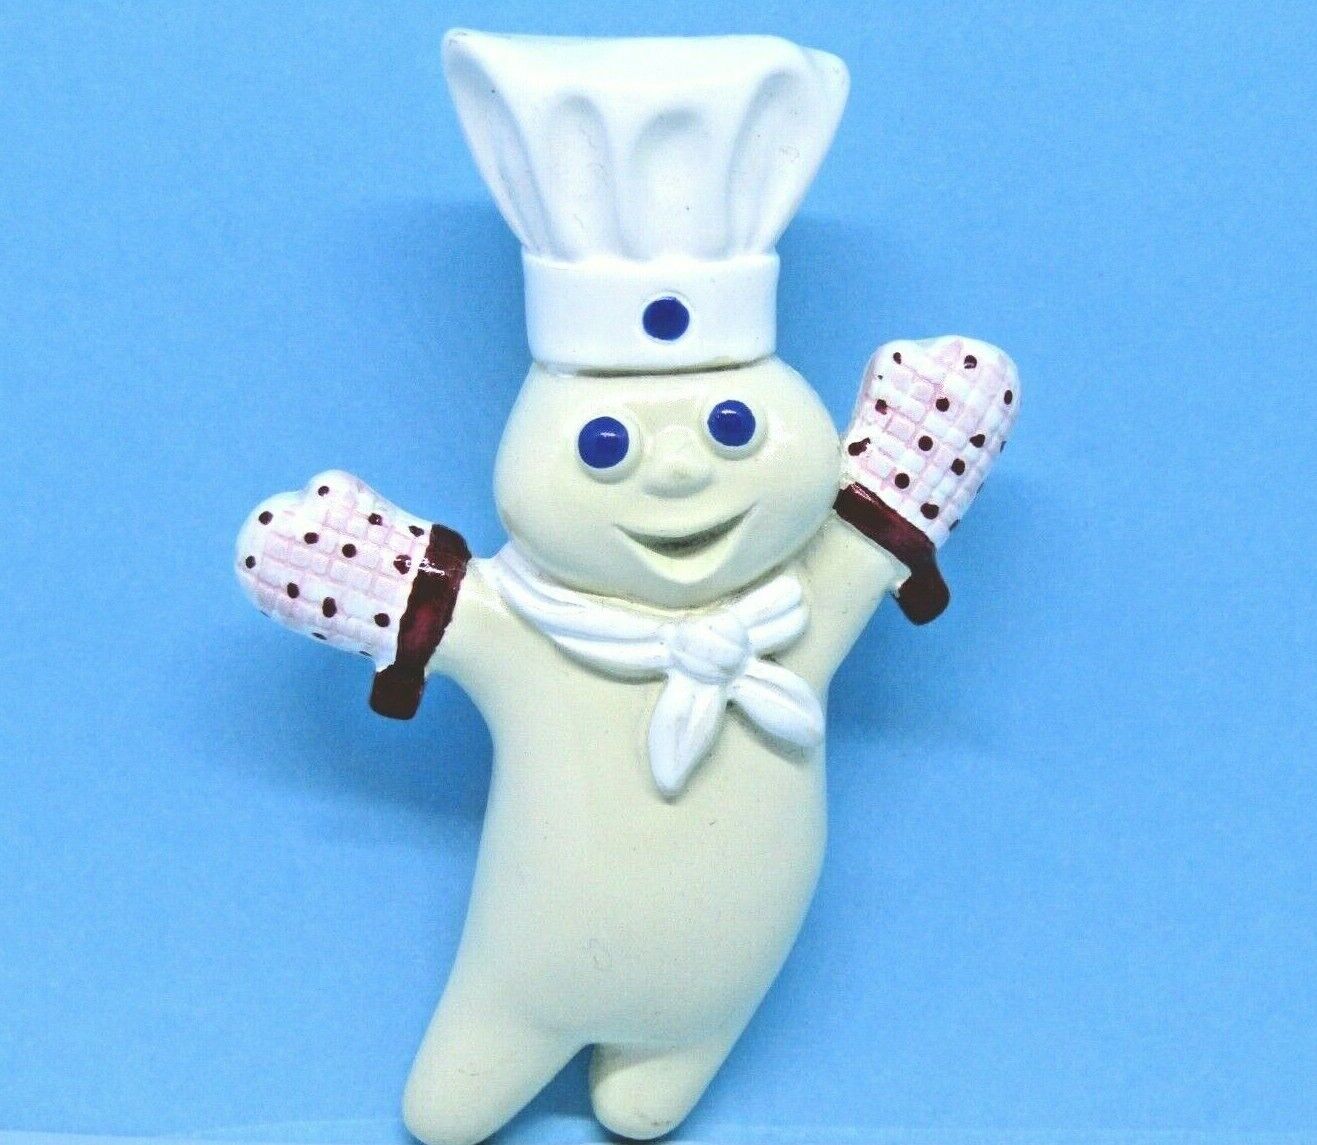 FS New PILLSBURY DOUGHBOY MAGNET - CHEF w RED GINGHAM OVEN MITTS / GLOVES BY B&M